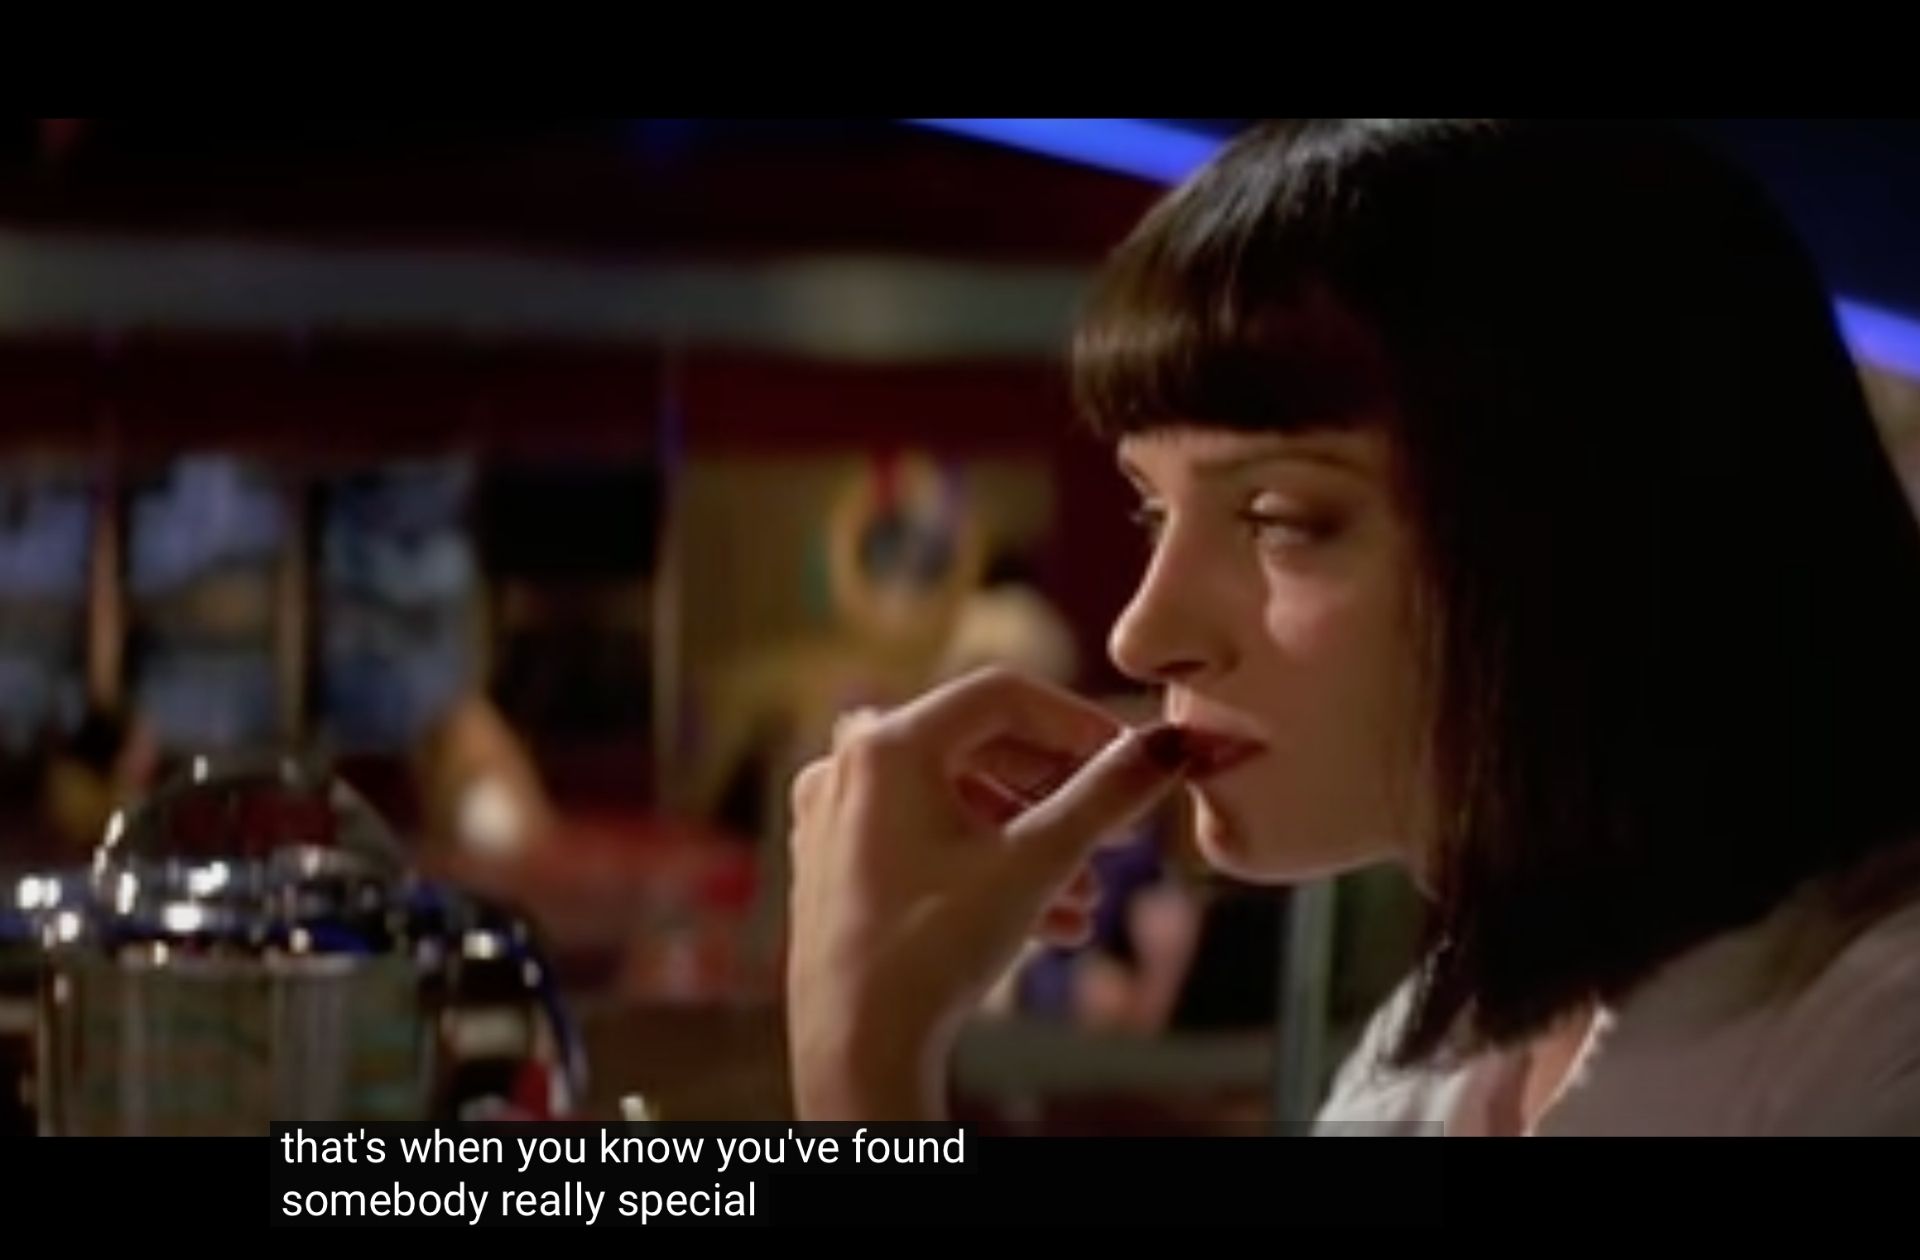 mia-wallace-pulp-fiction-silence-inconfortable